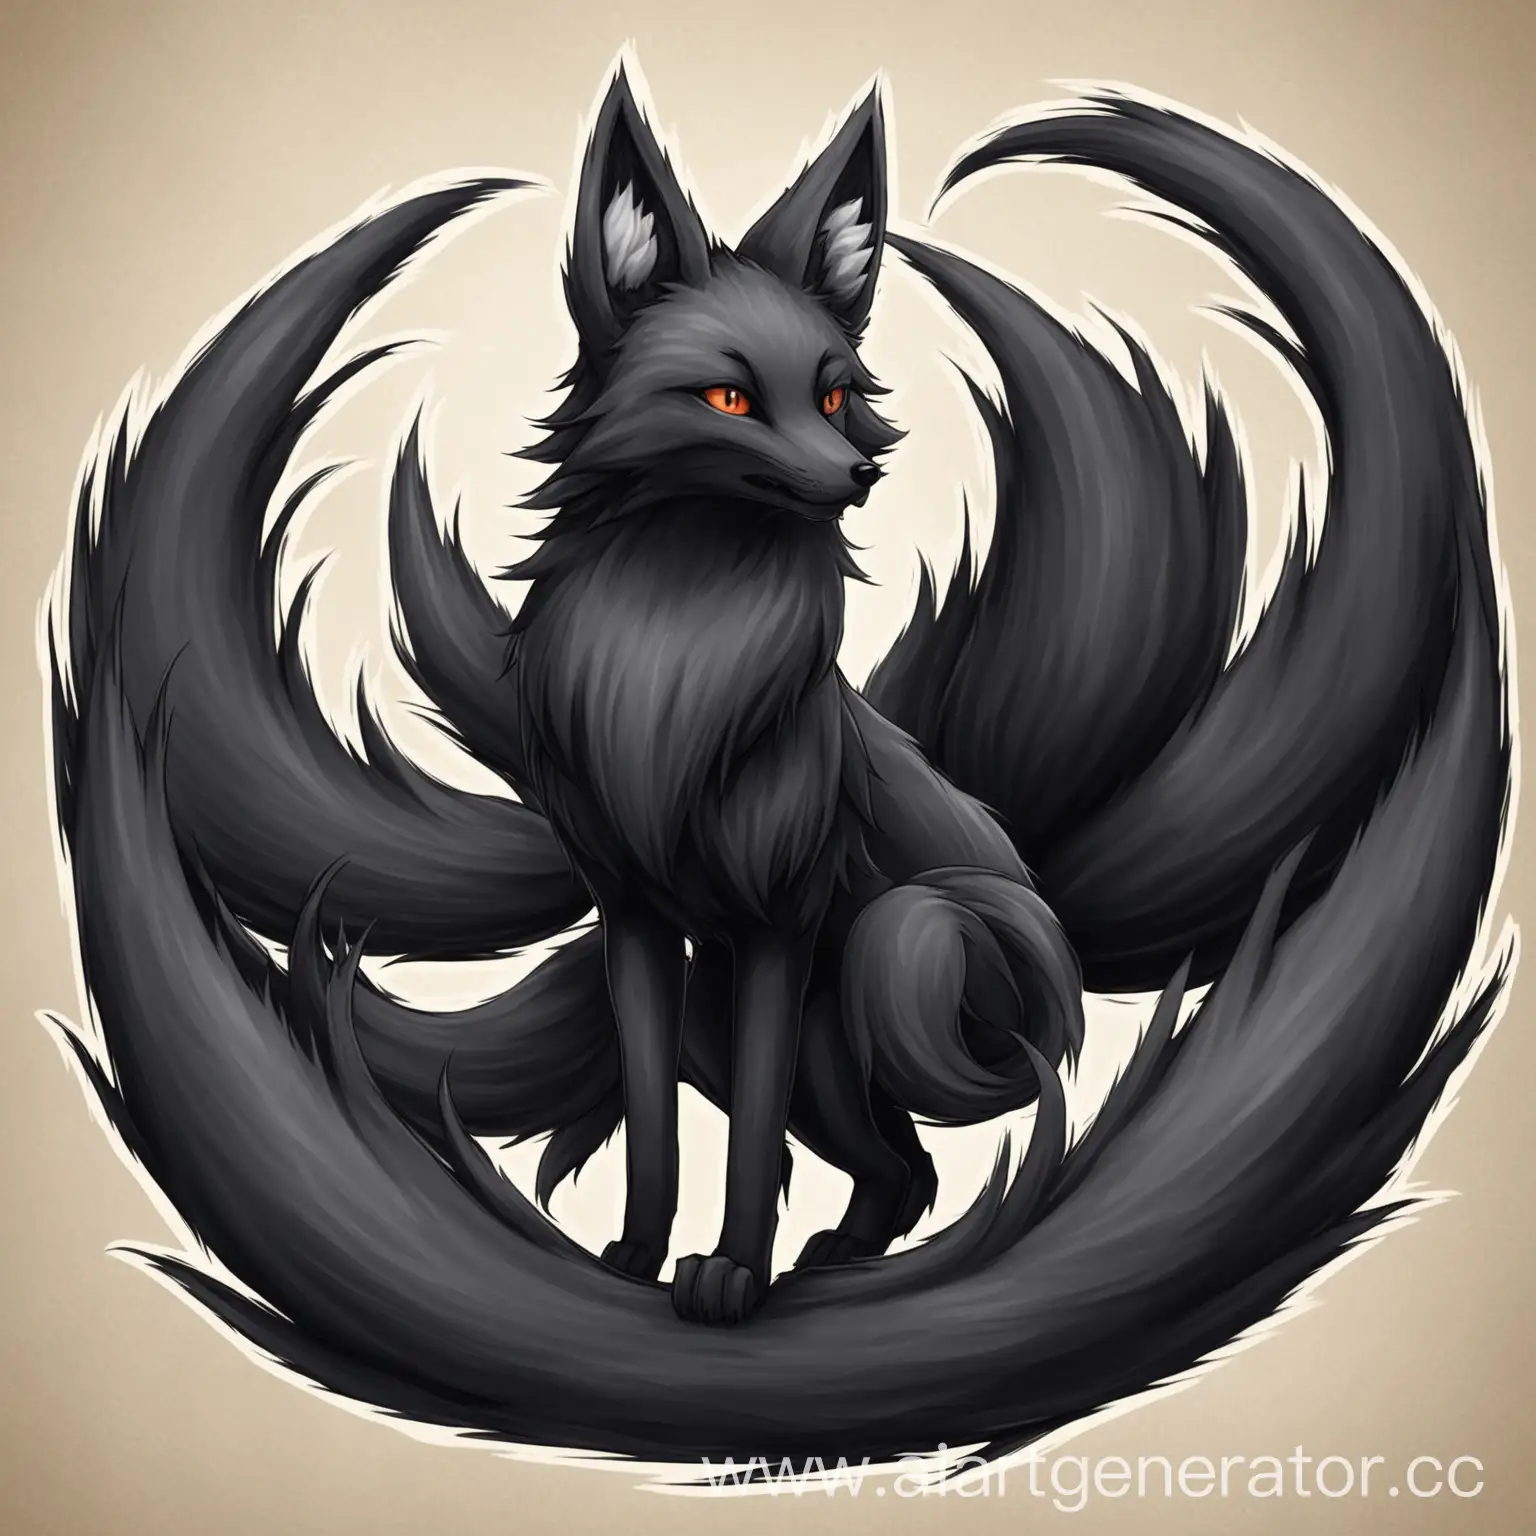 Black-NineTailed-Fox-with-a-Tail-in-Ear